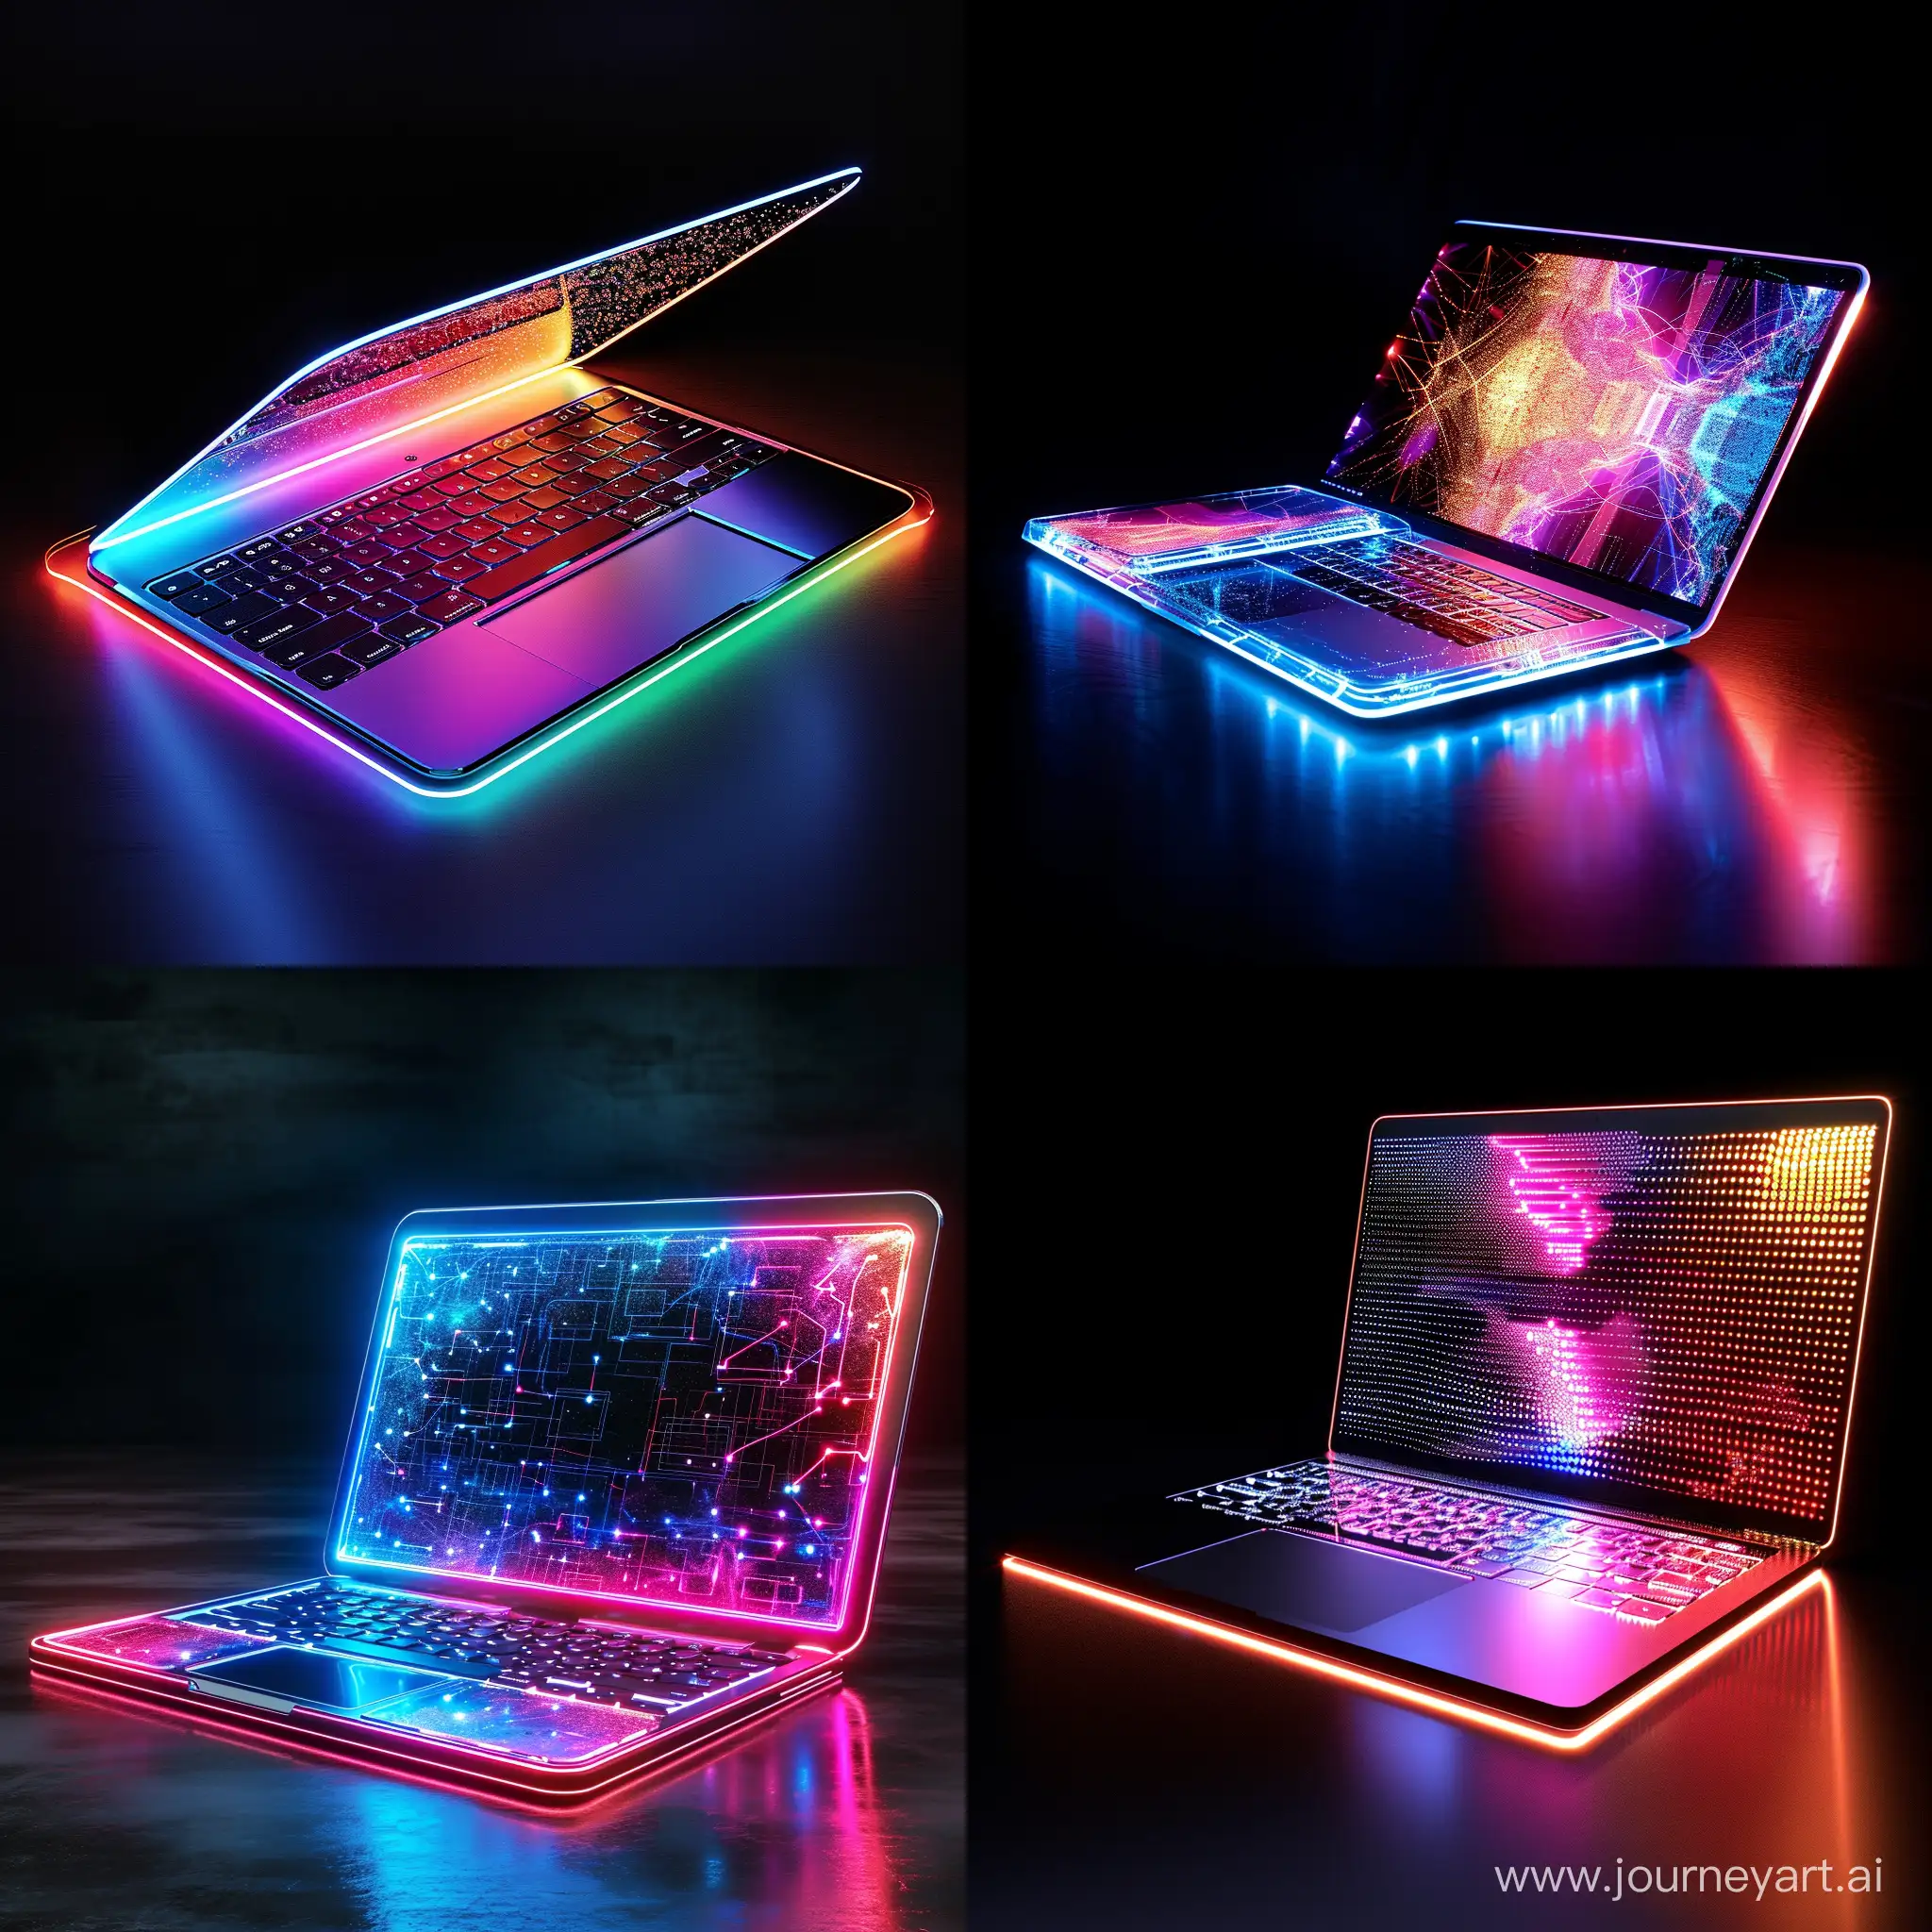 Futuristic-Laptop-with-Organic-LED-and-Microscopic-Quantum-Dots